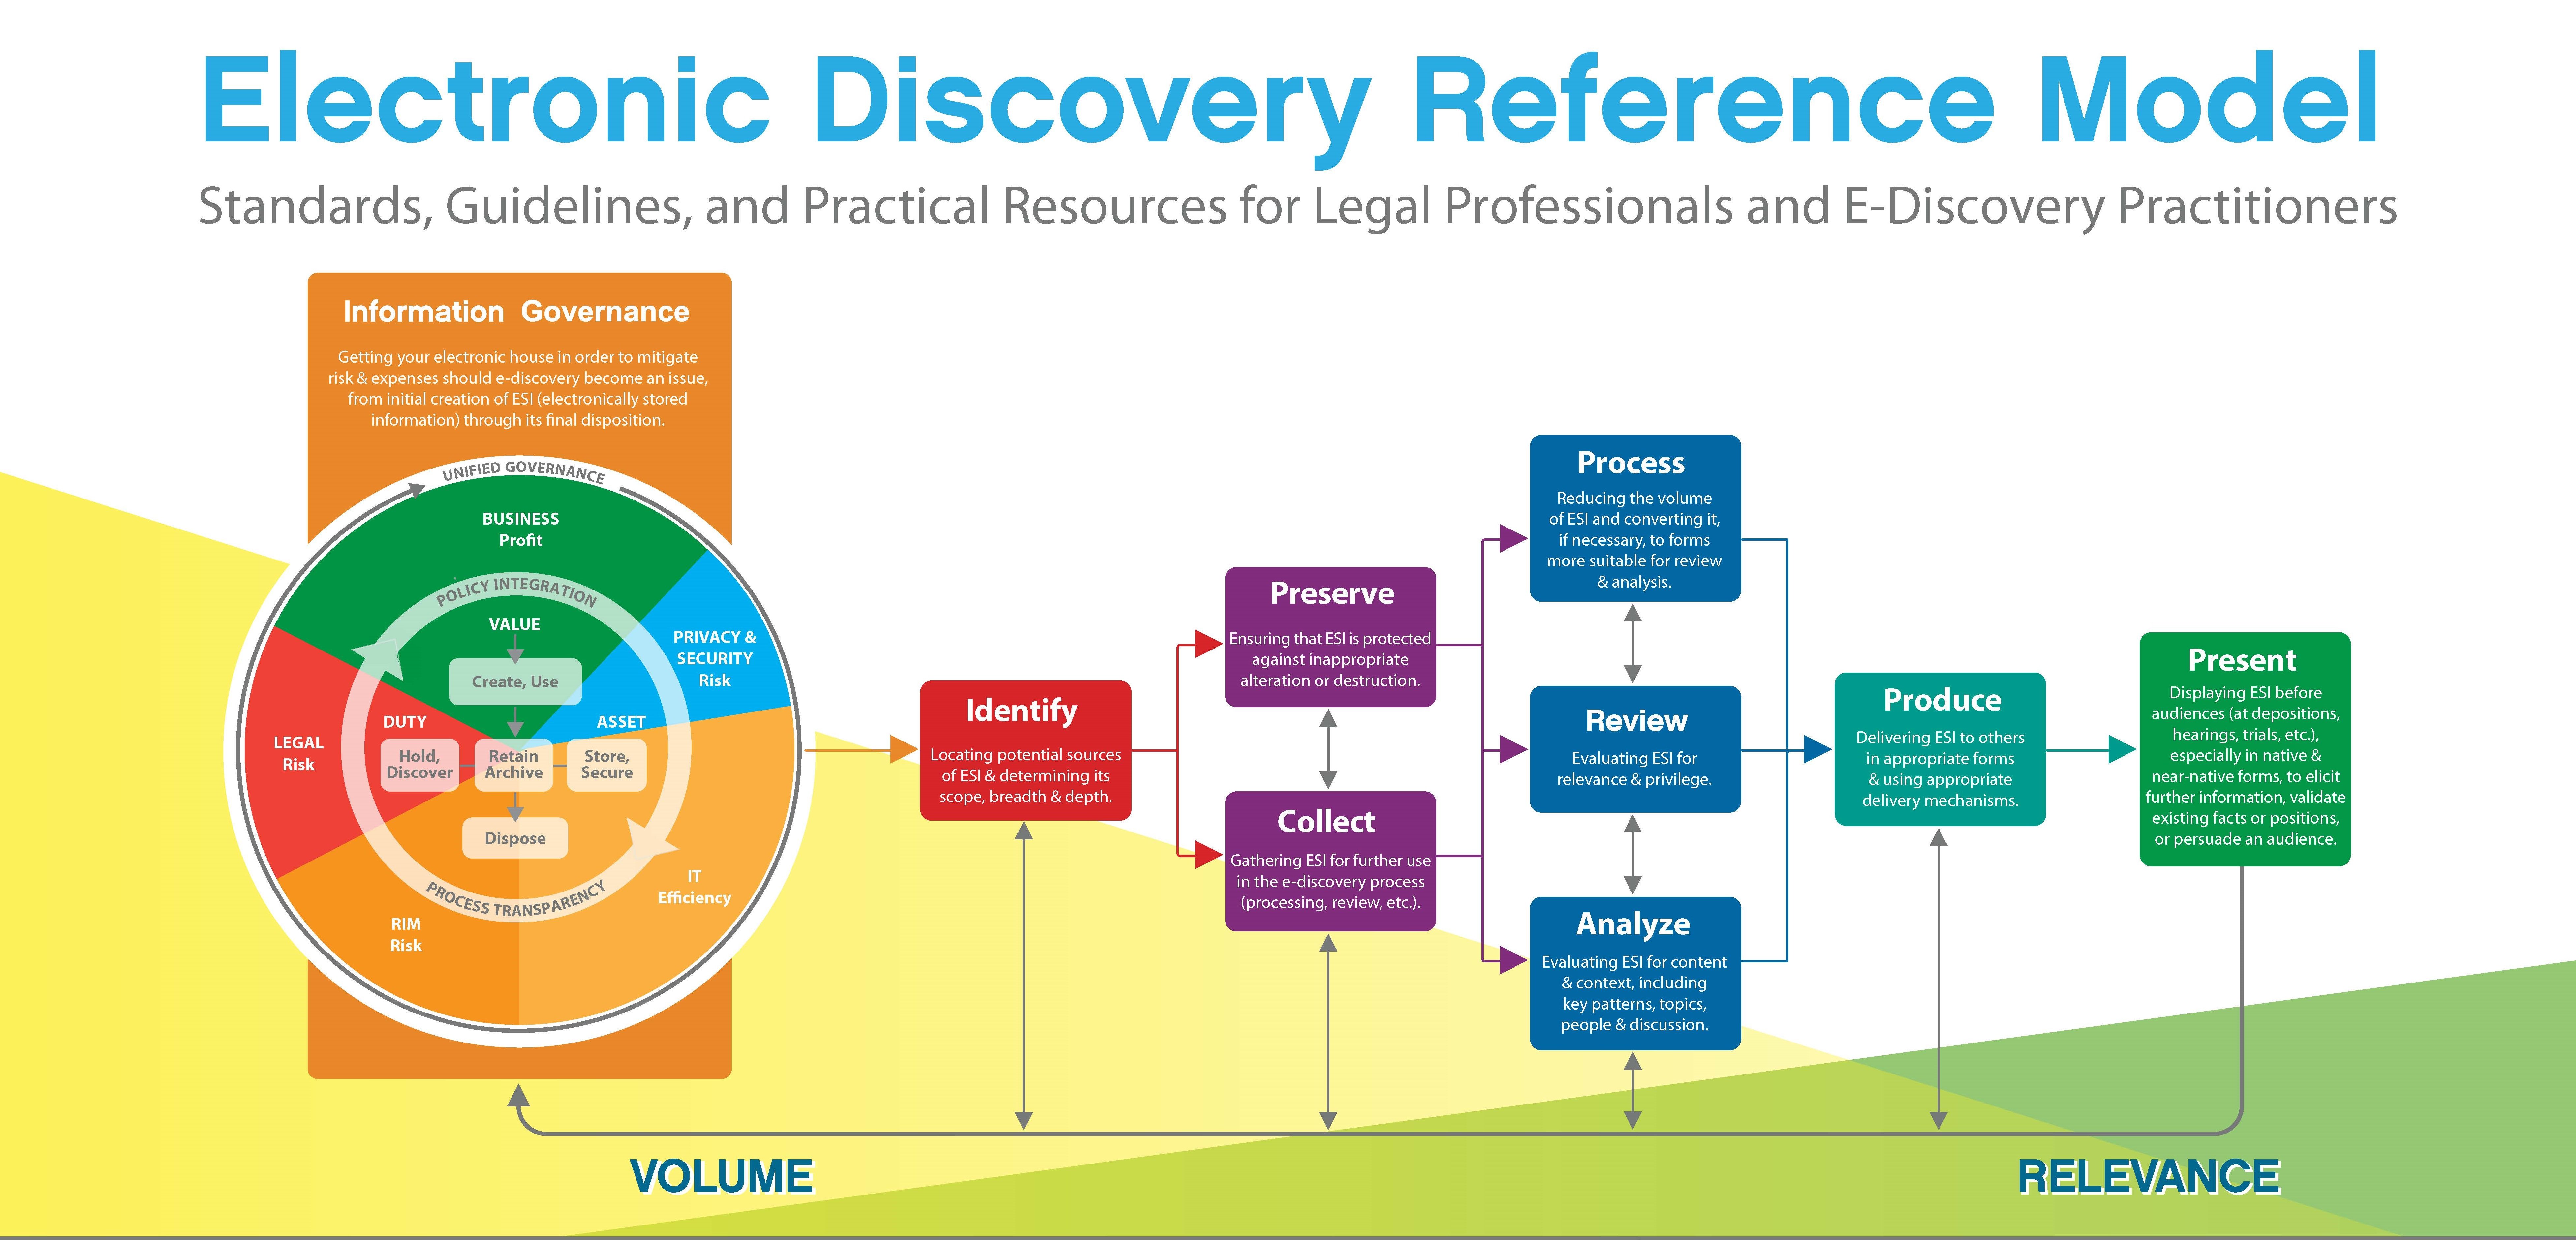 EDRM-e-discovery-reference-model-1